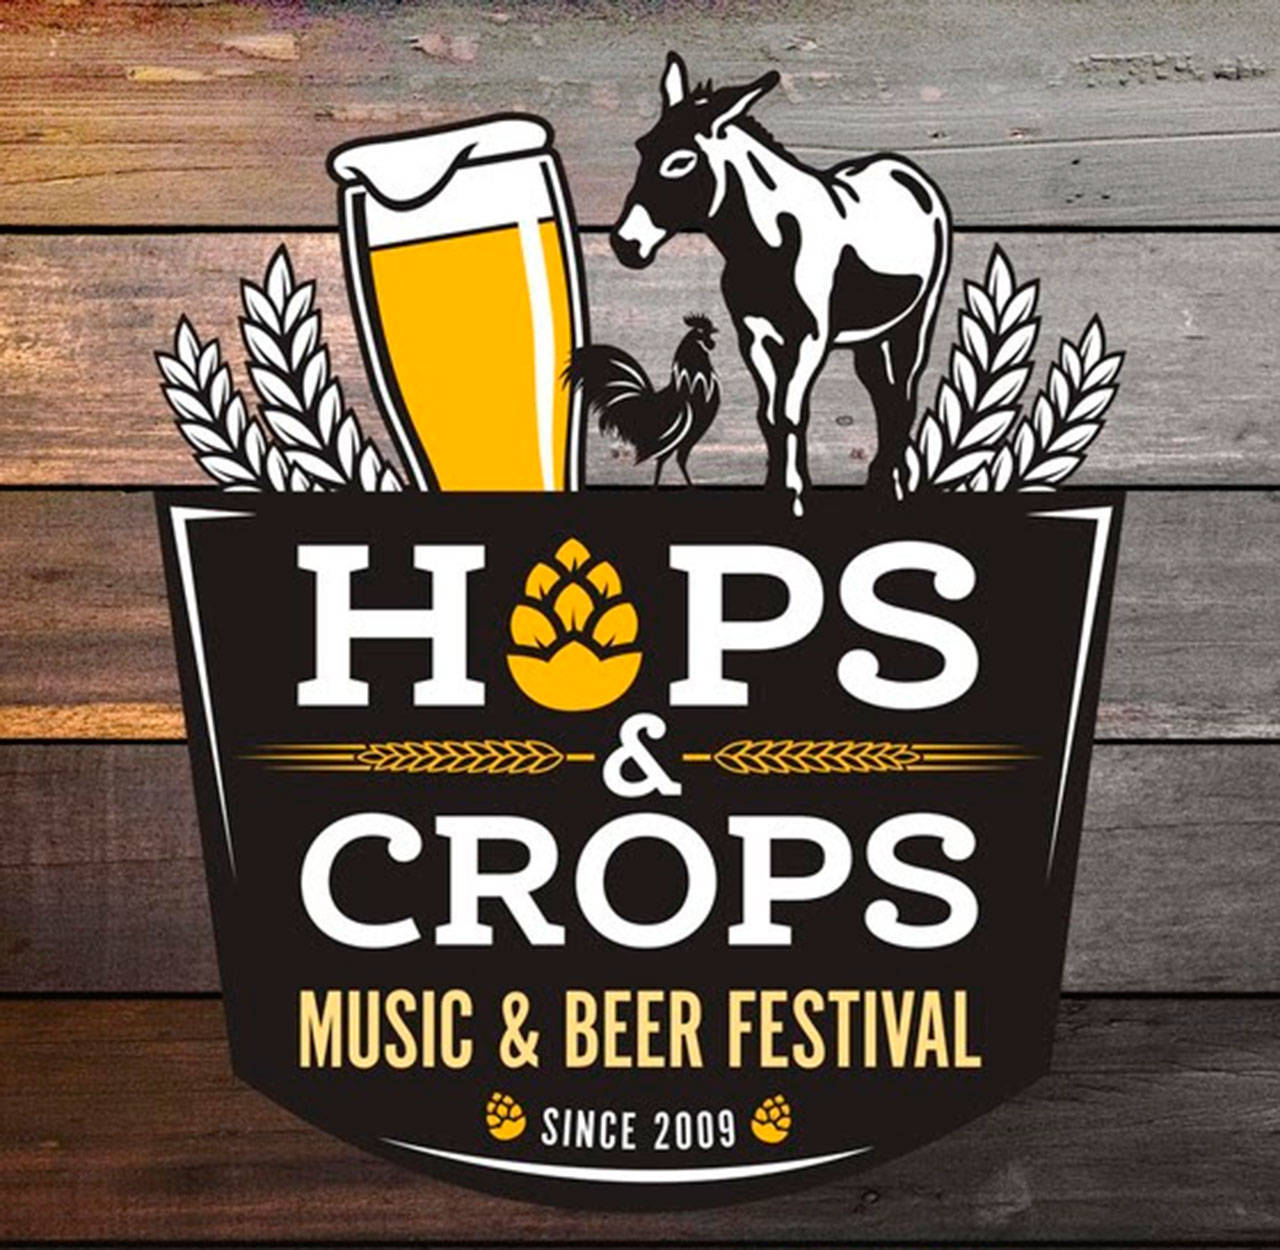 10th annual Hops & Crops Music and Beer Festival to come alive at Mary Olson Farm